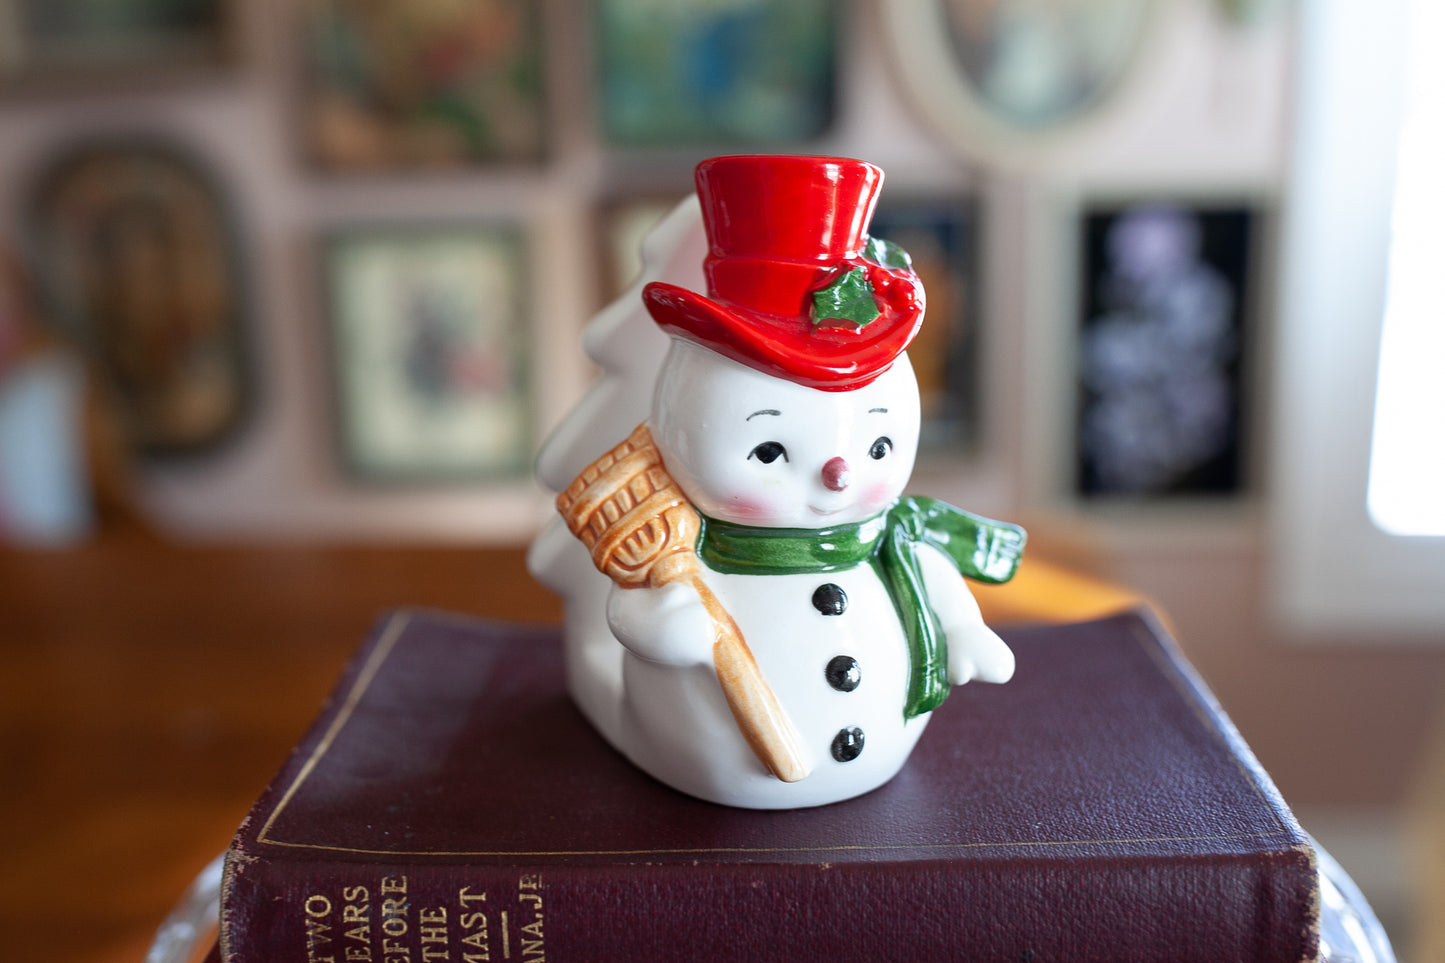 Vintage Ceramic Napkin Holder of Snowman Wearing a Top Hat with Broom and Scarf by Lefton Japan